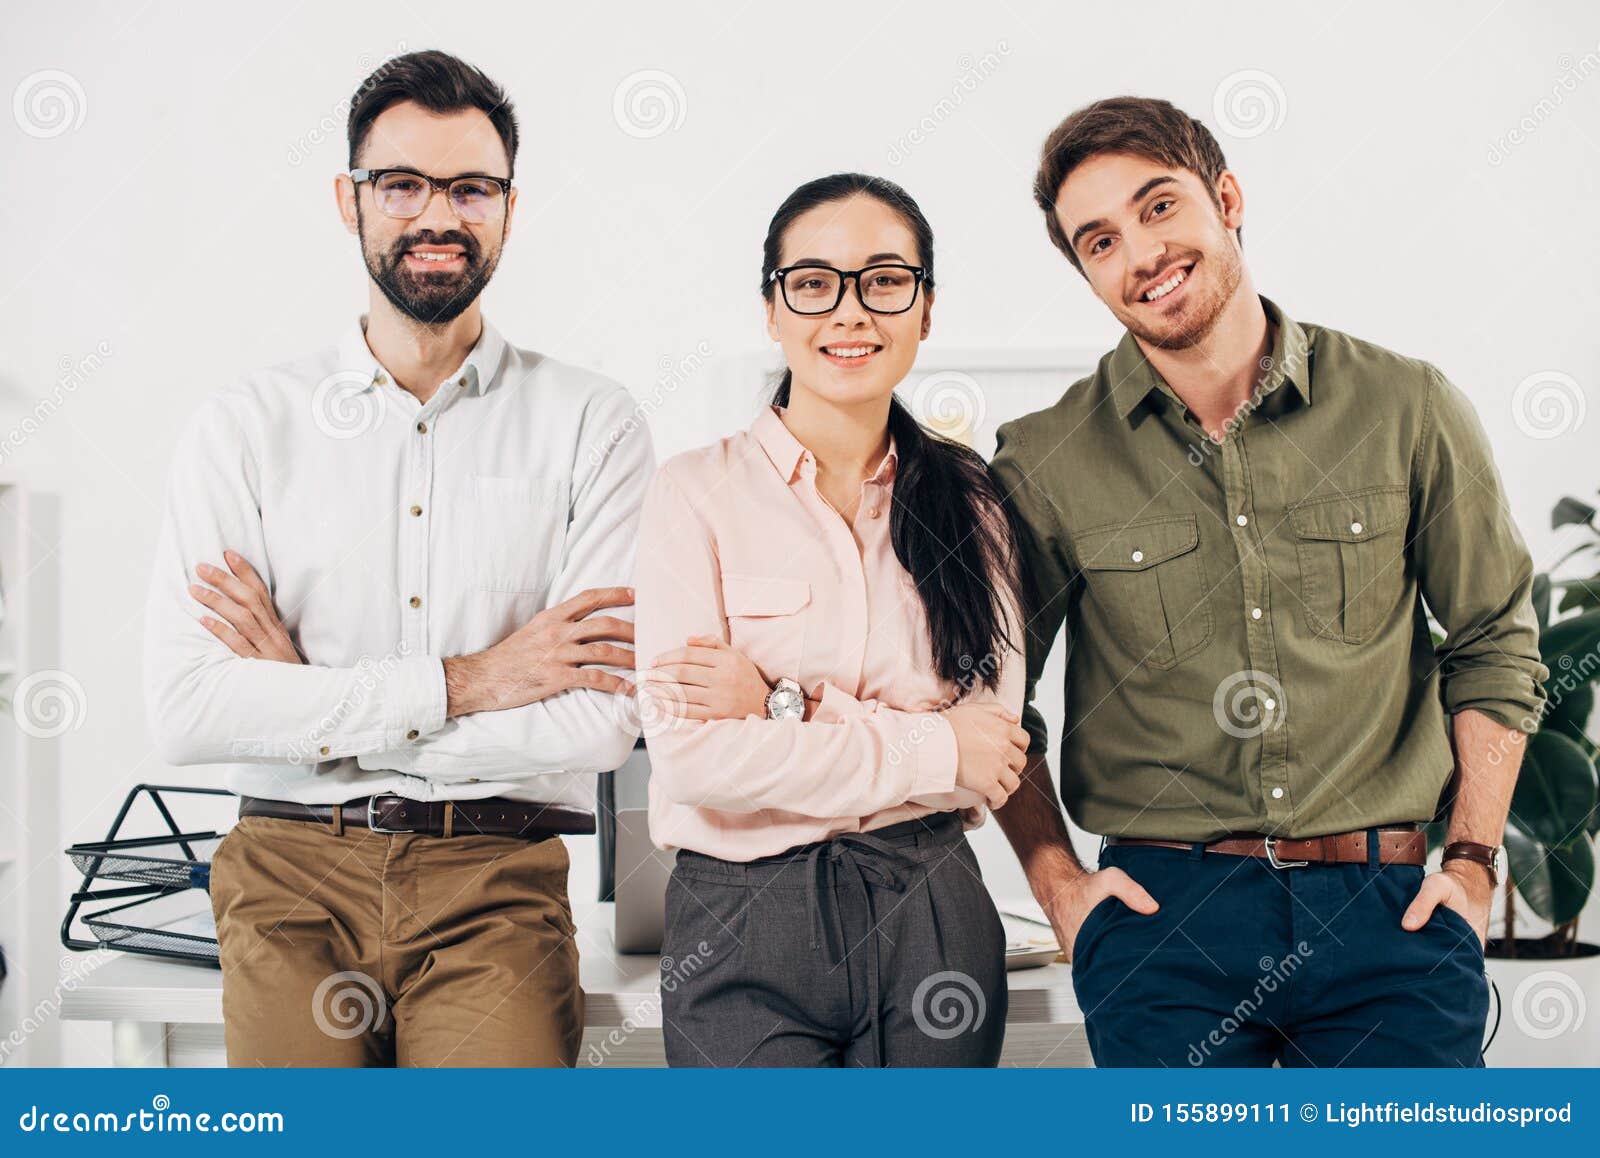 office managers with arms crossed smiling and looking at camera